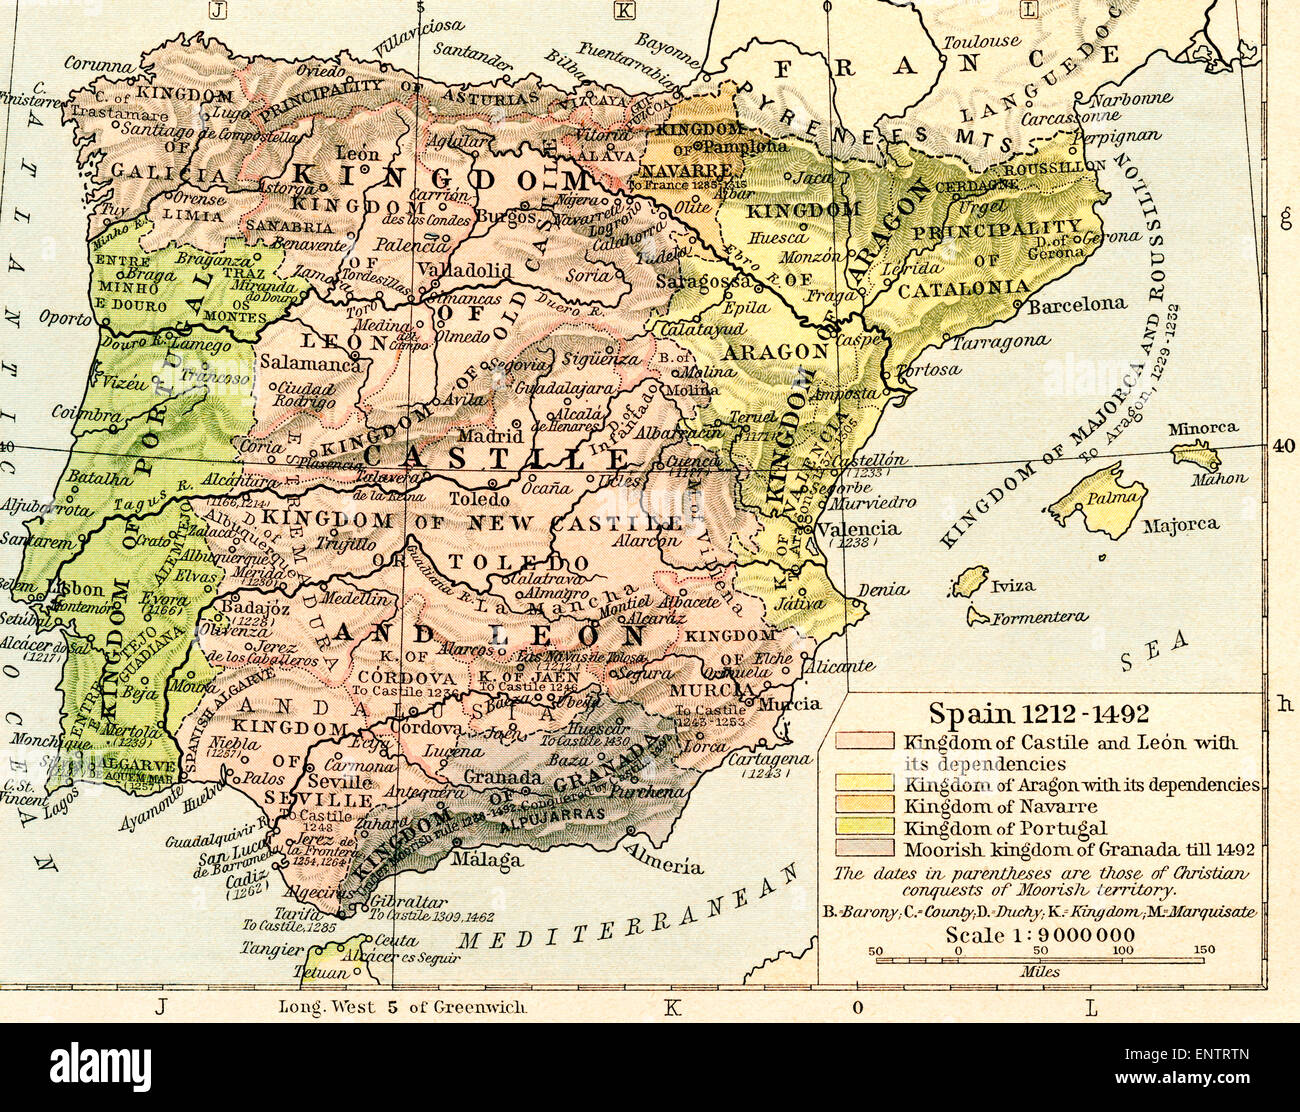 Map of Spain, 1212-1492.  Showing the kingdom of Castile and León with its dependencies,  kingdom of Aragon with its dependencies, kingdom of Navarre, kingdom of Portugal and Moorish kingdom of Granada till 1492. Stock Photo